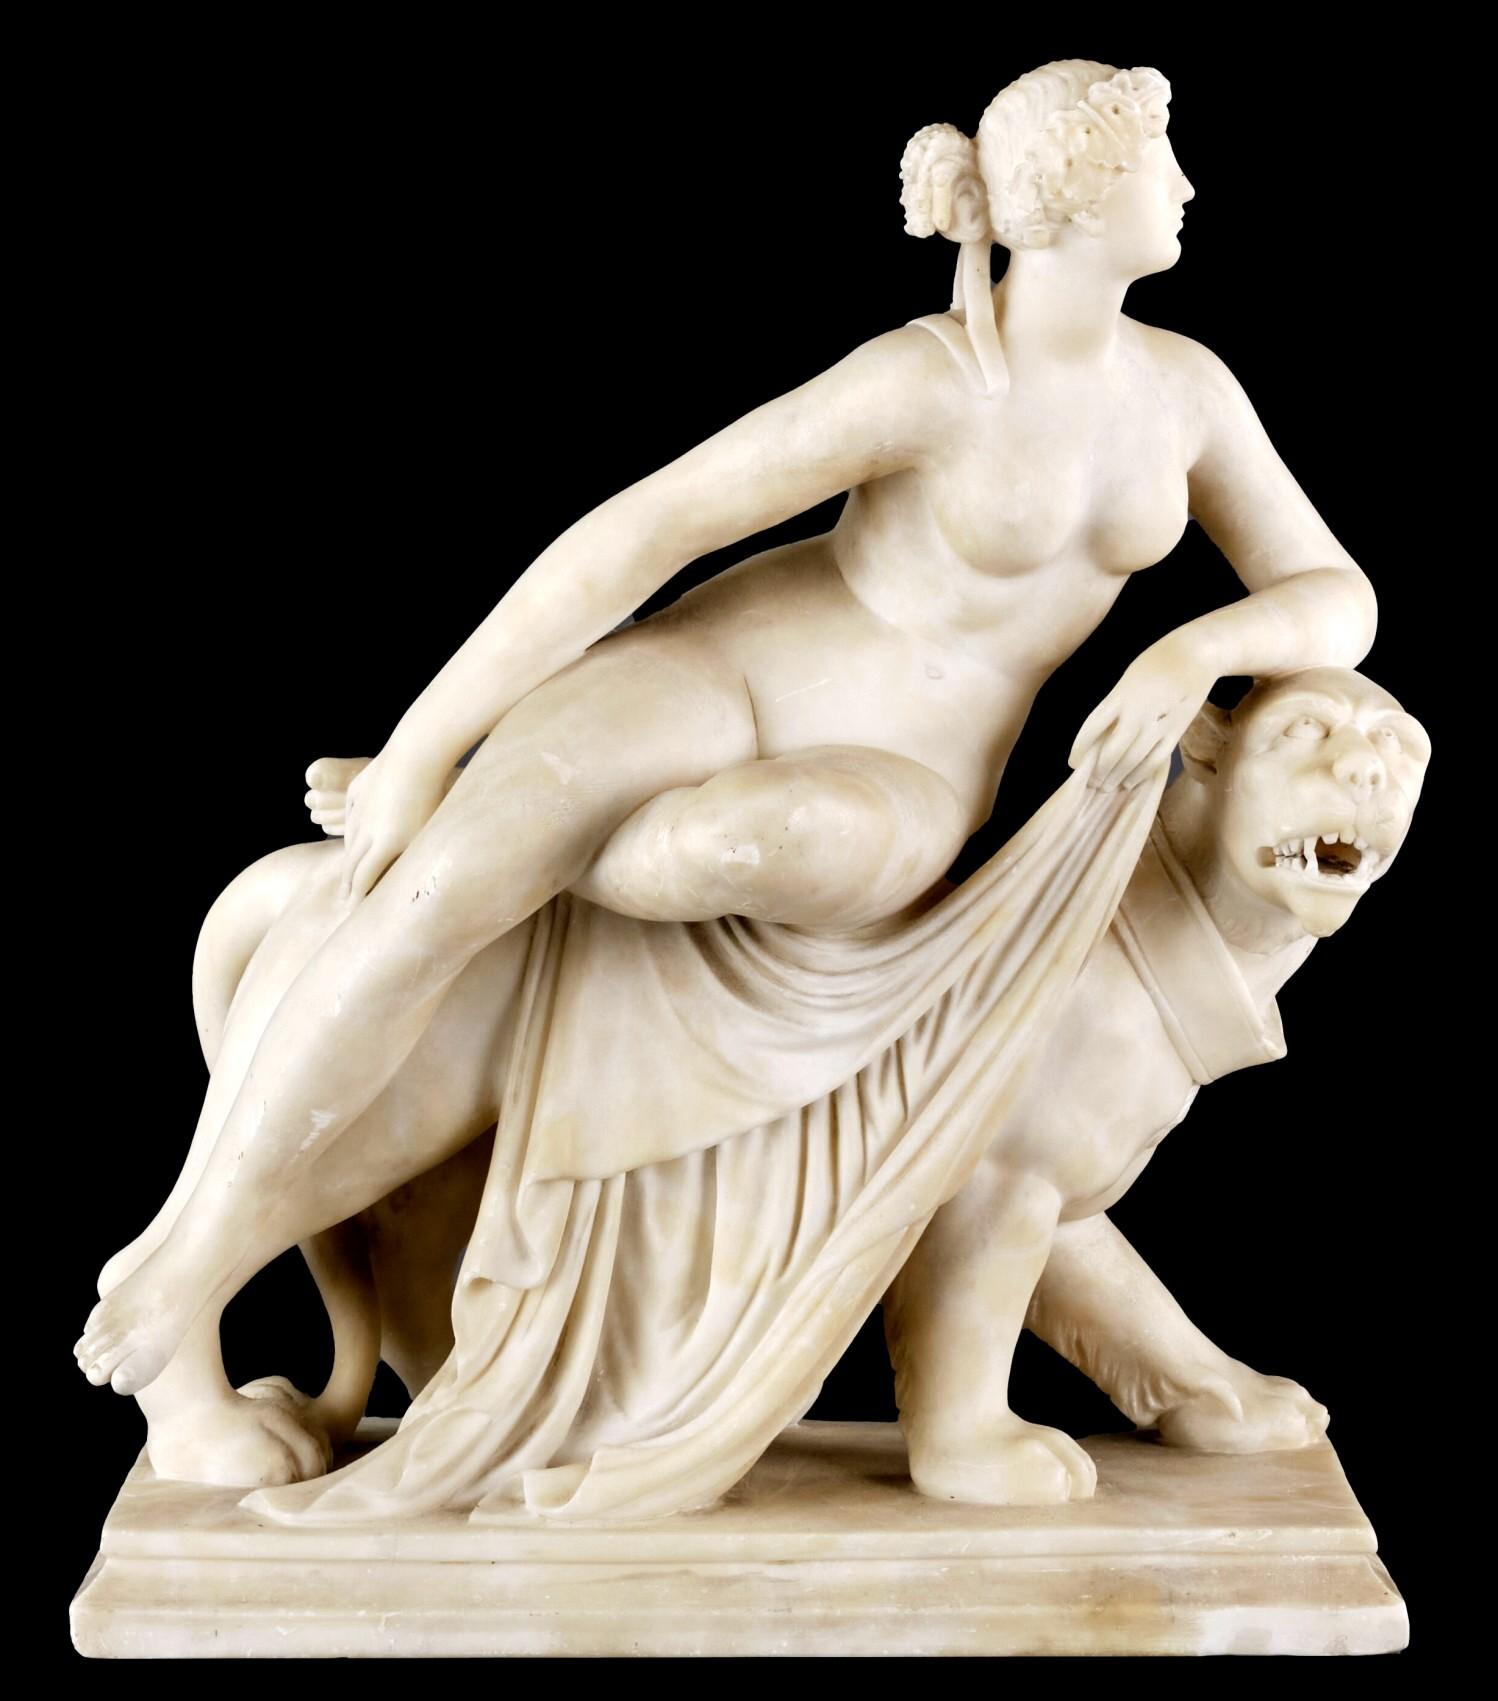 A large & finely sculpted alabaster figure of Ariadne, wife of Dionysus the God of wine, shown adorned with a diadem of vine leaves while in repose atop the back of Dionysus’s striding panther. 
Sensitively & skillfully carved with exacting